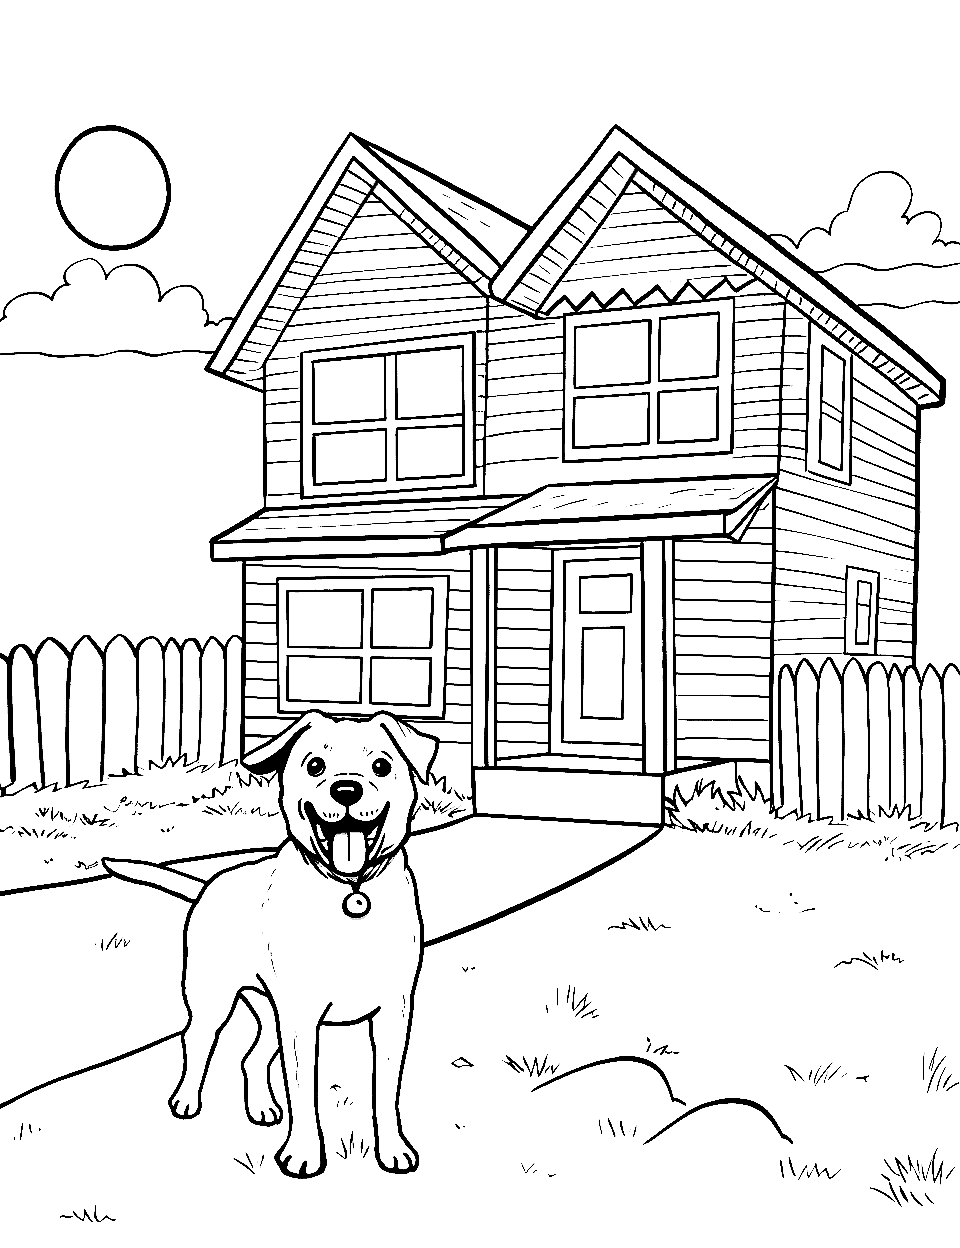 House coloring pages free printable sheets